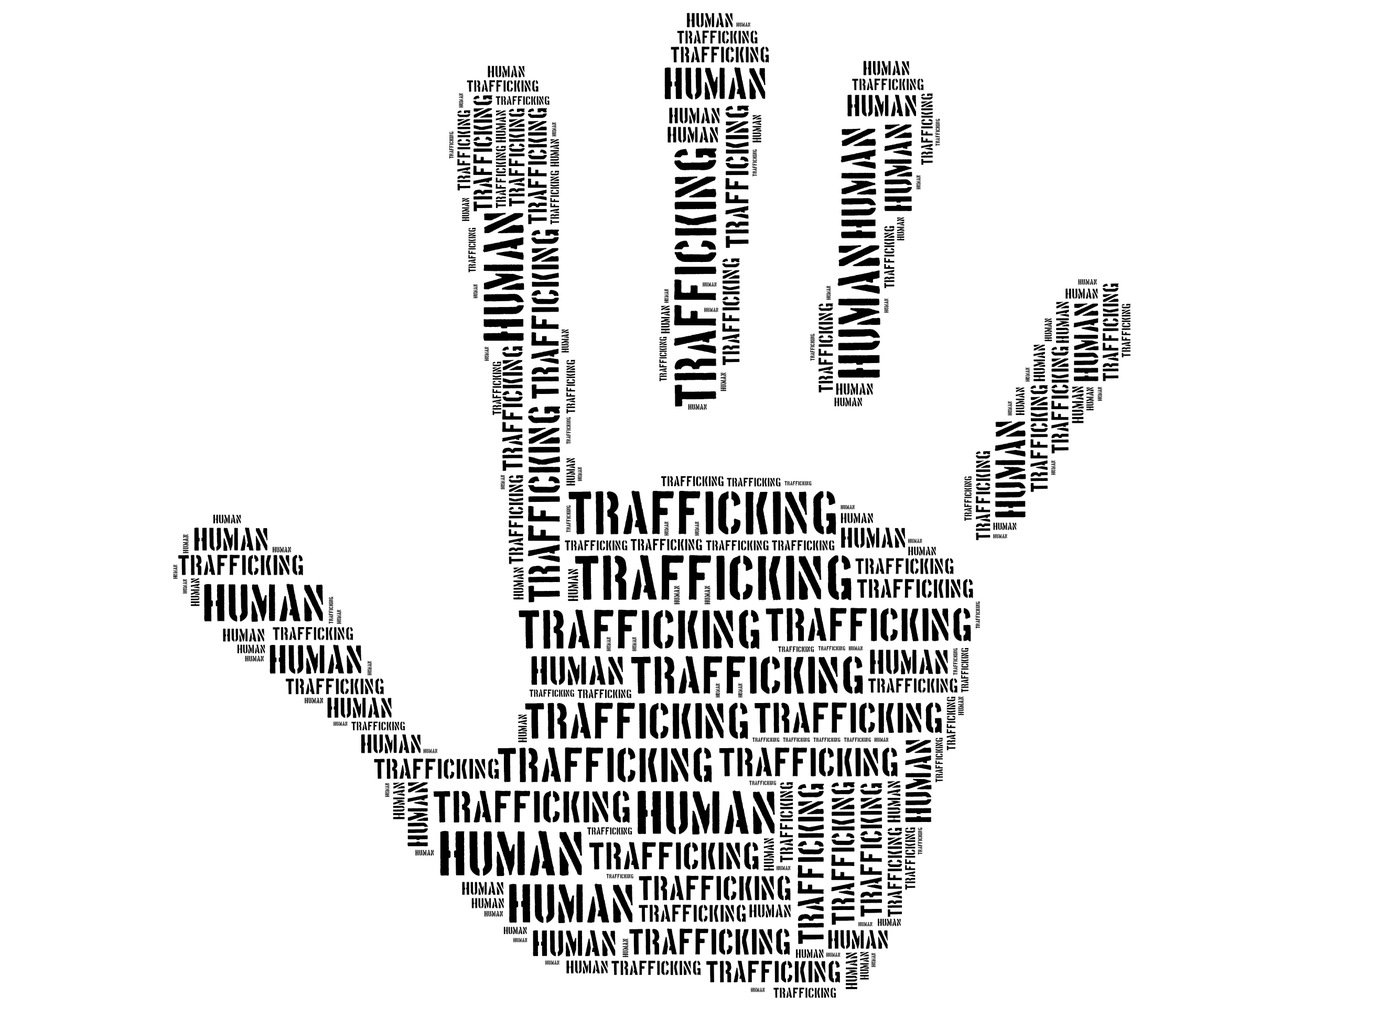 Stock image of the shape of a hand in a stopping motion filled with text that says “trafficking.” 